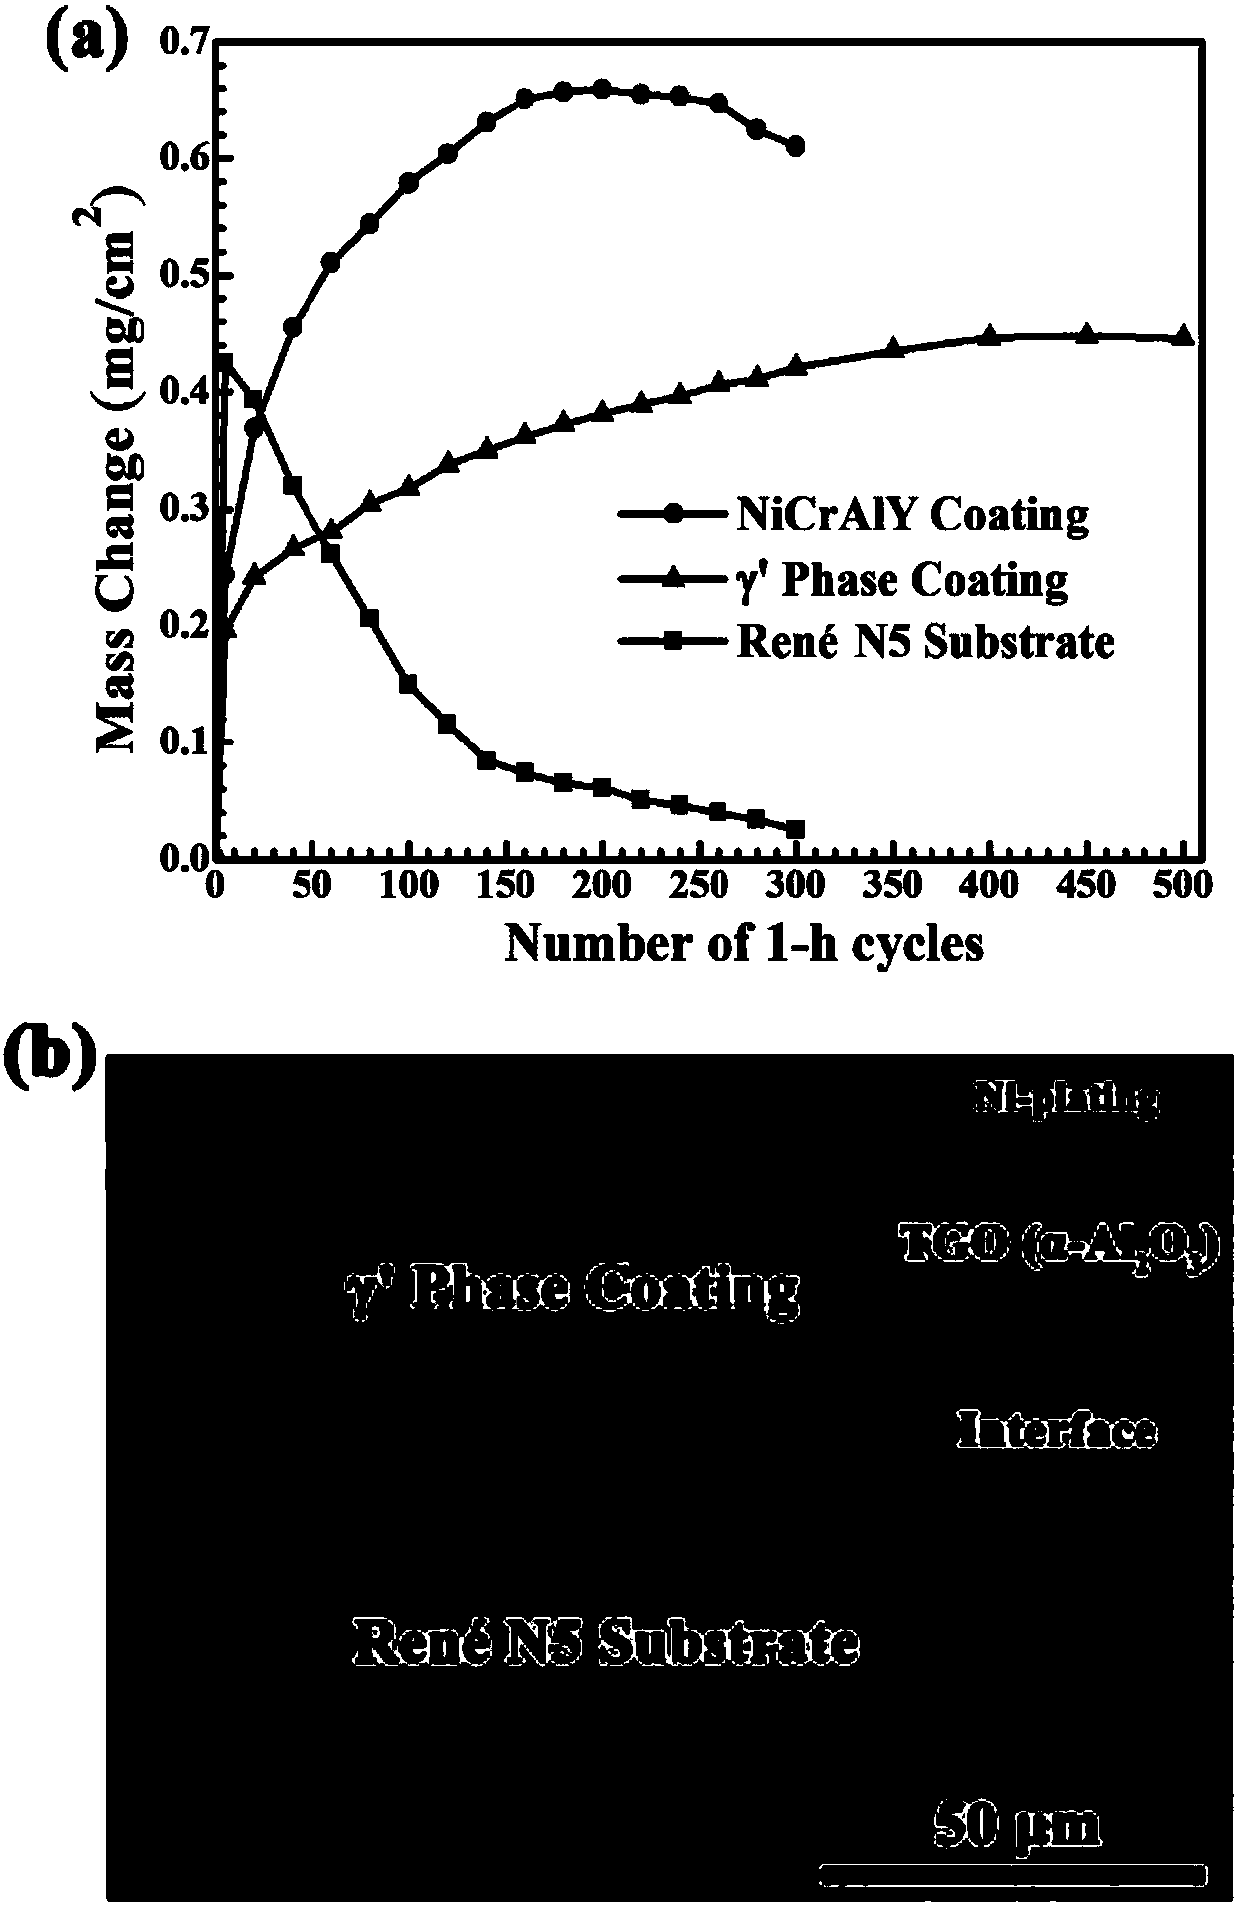 High temperature protective coating material suitable for single crystal nickel-based superalloy blades